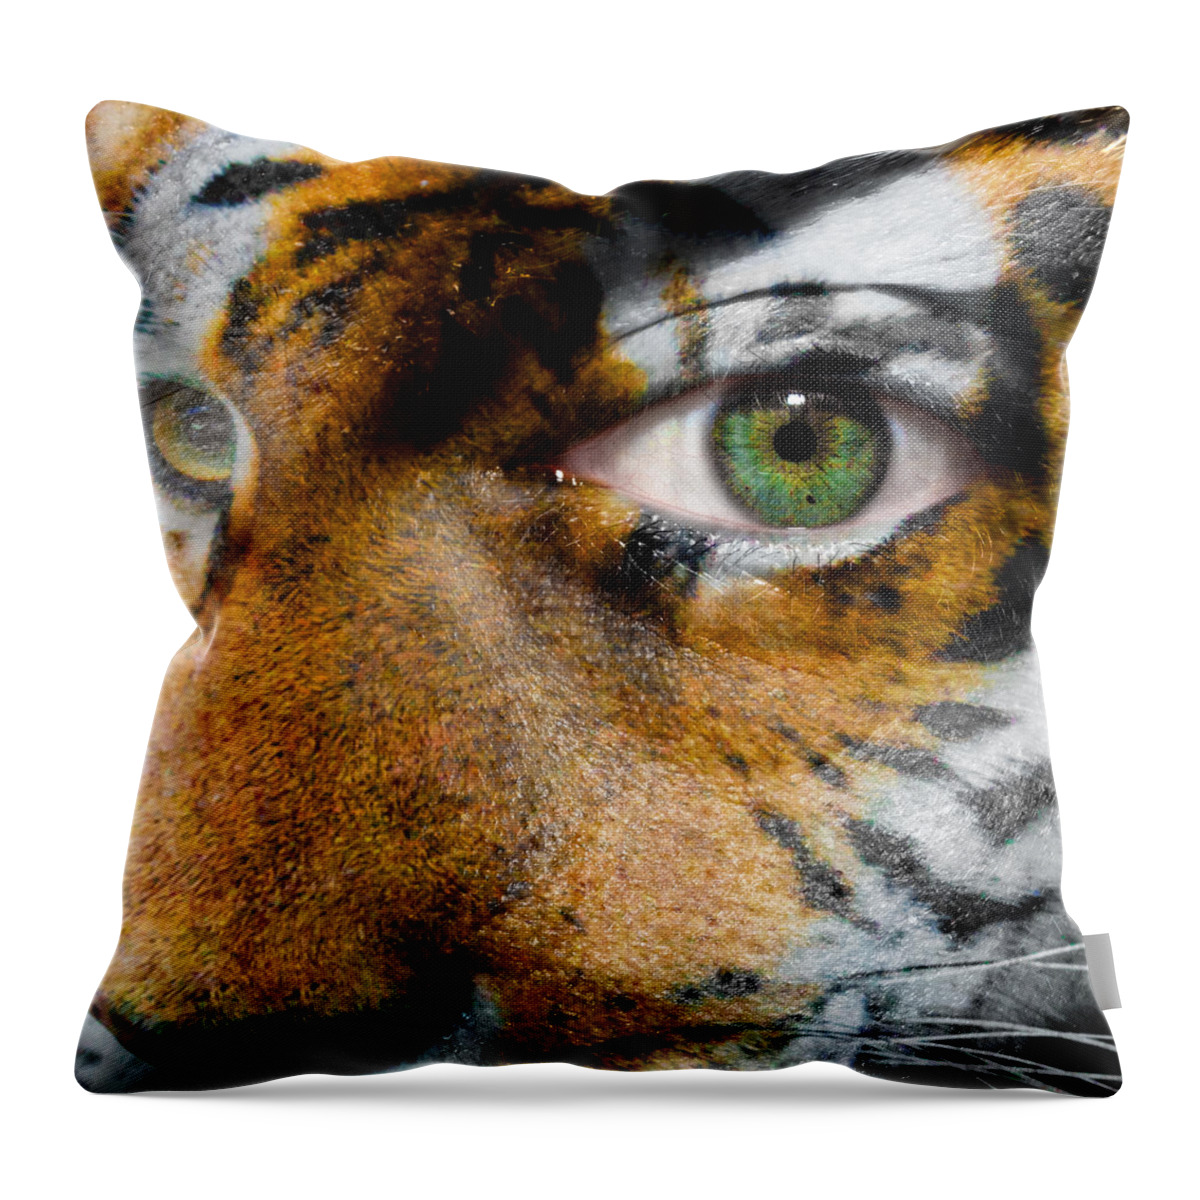 siberian Tiger Throw Pillow featuring the photograph Siberian Man by Semmick Photo